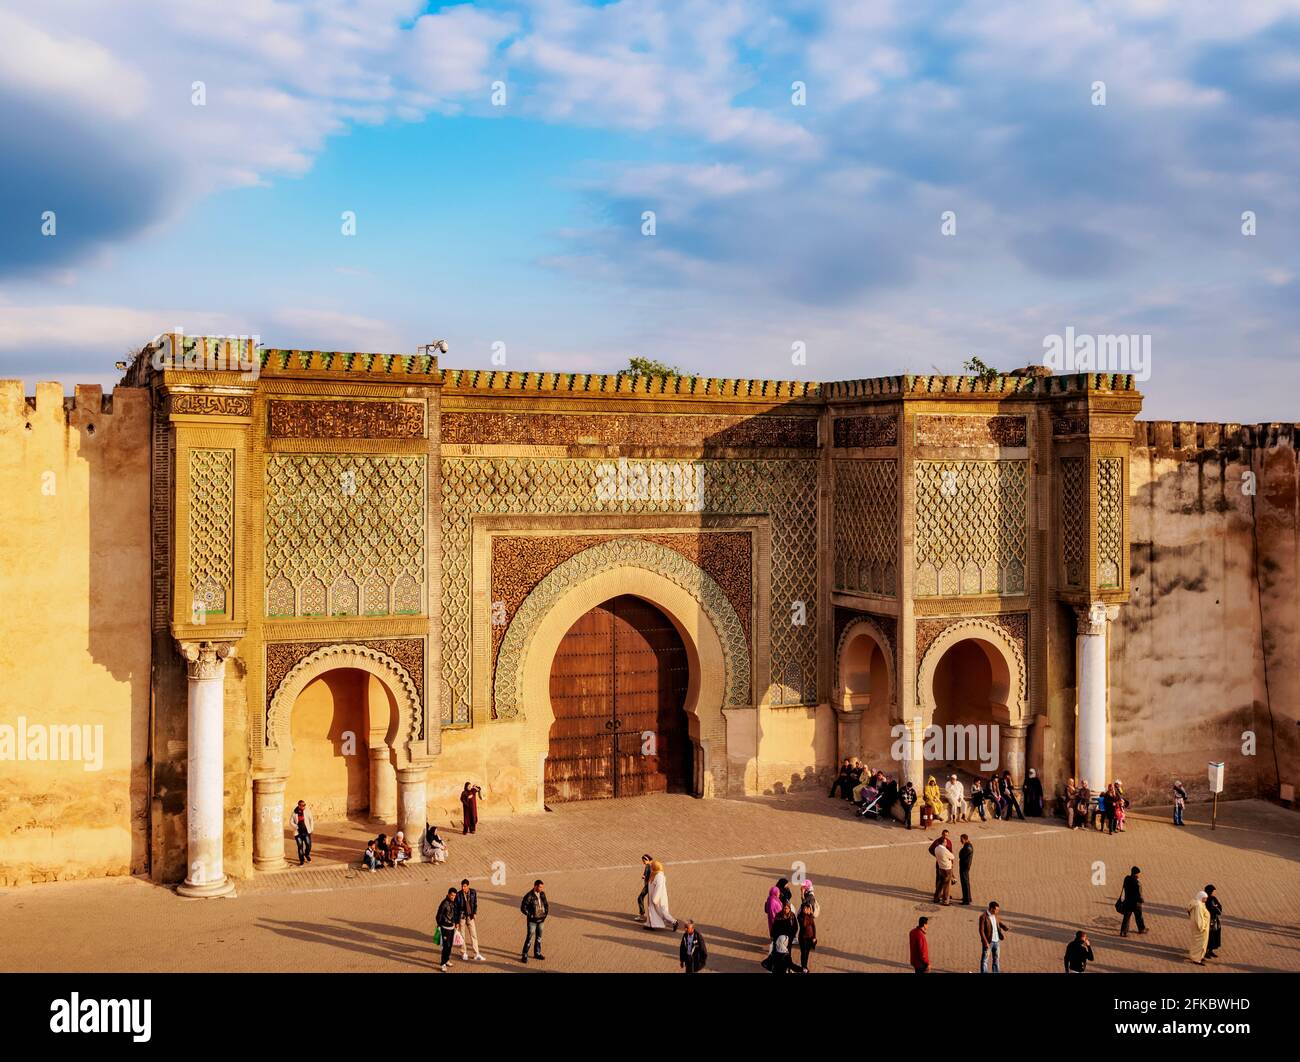 Bab Mansur (Bab Mansour), gate of the Old Medina, UNESCO World Heritage Site, elevated view, Meknes, Fez-Meknes Region, Morocco, North Africa, Africa Stock Photo